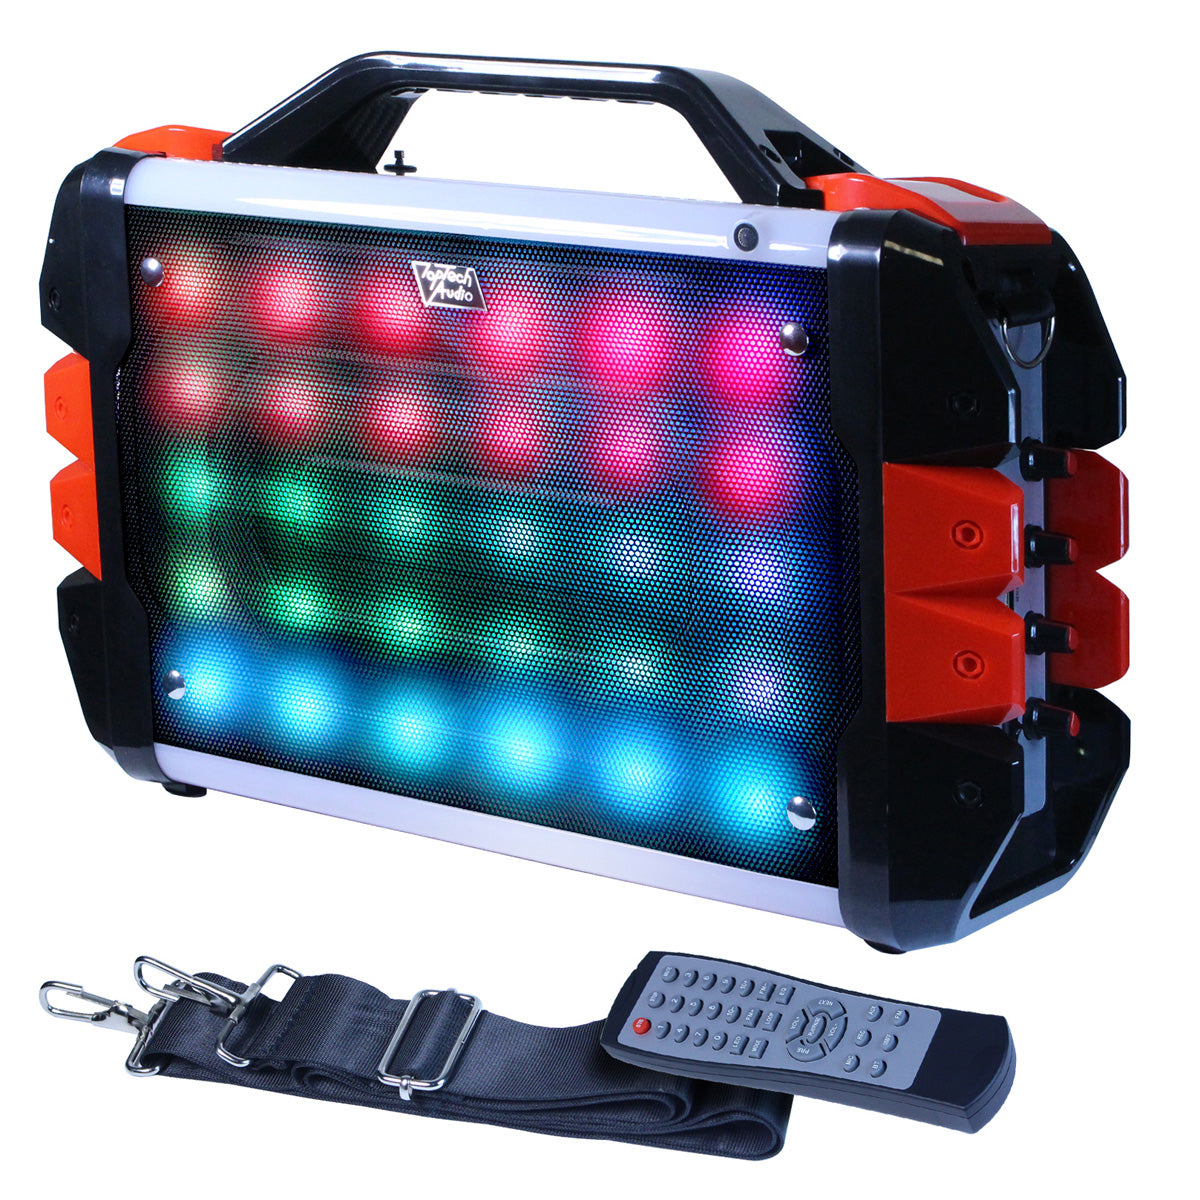 Fully Amplified Portable 1000 Watts Peak Power 6.5” Speaker with led light